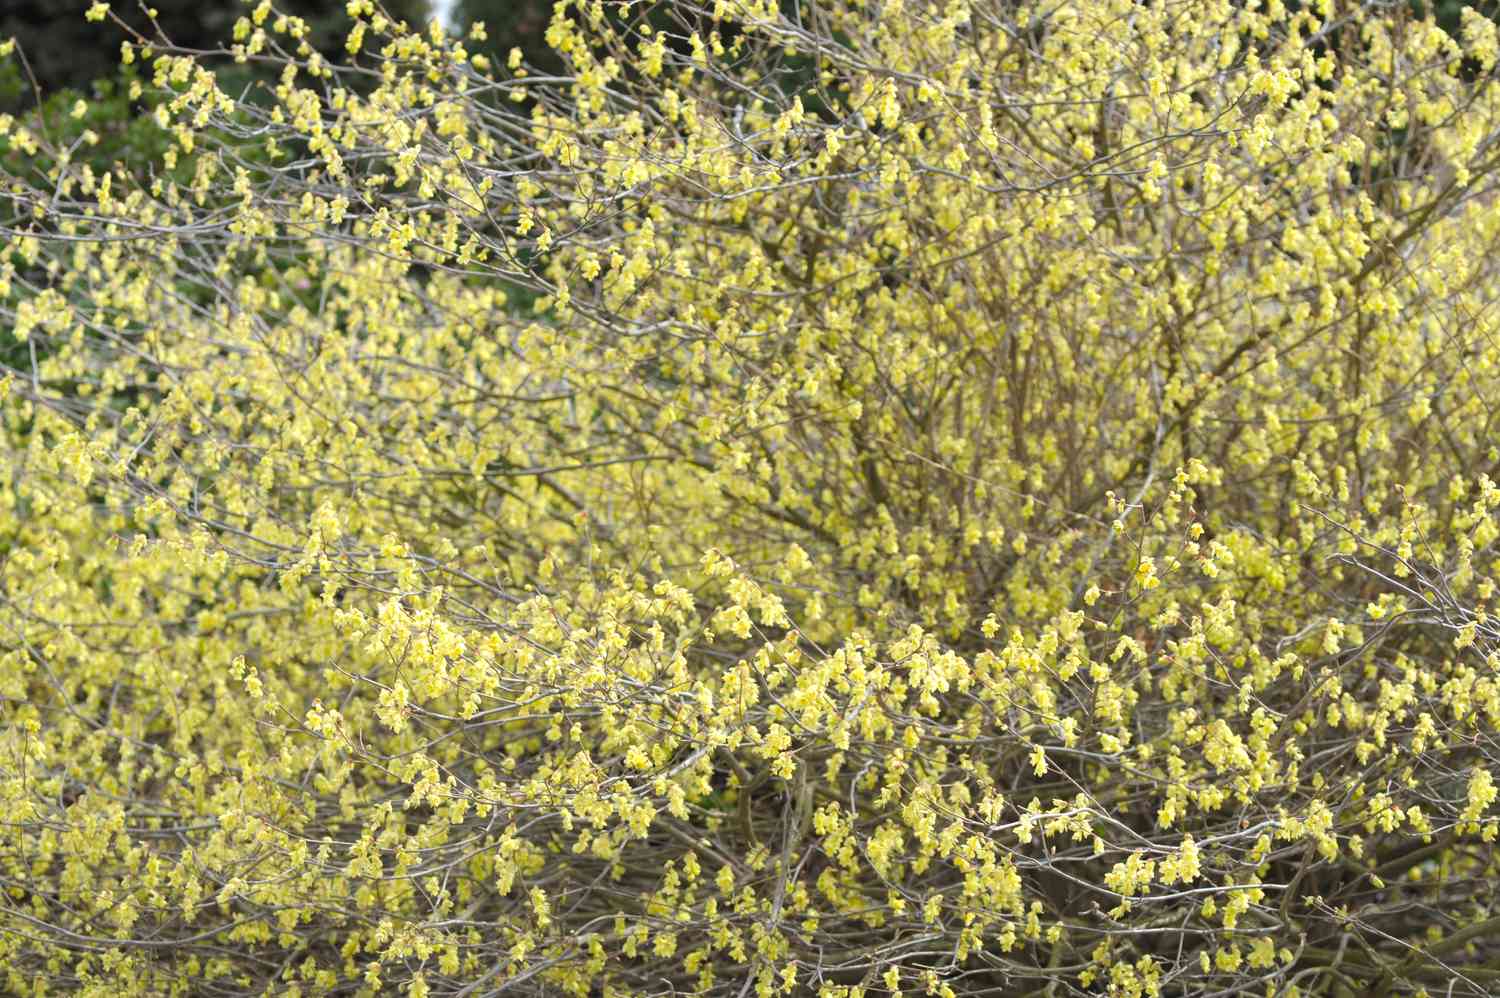 Buttercup winter hazel shrub with long extending branches with small pale yellow flowers